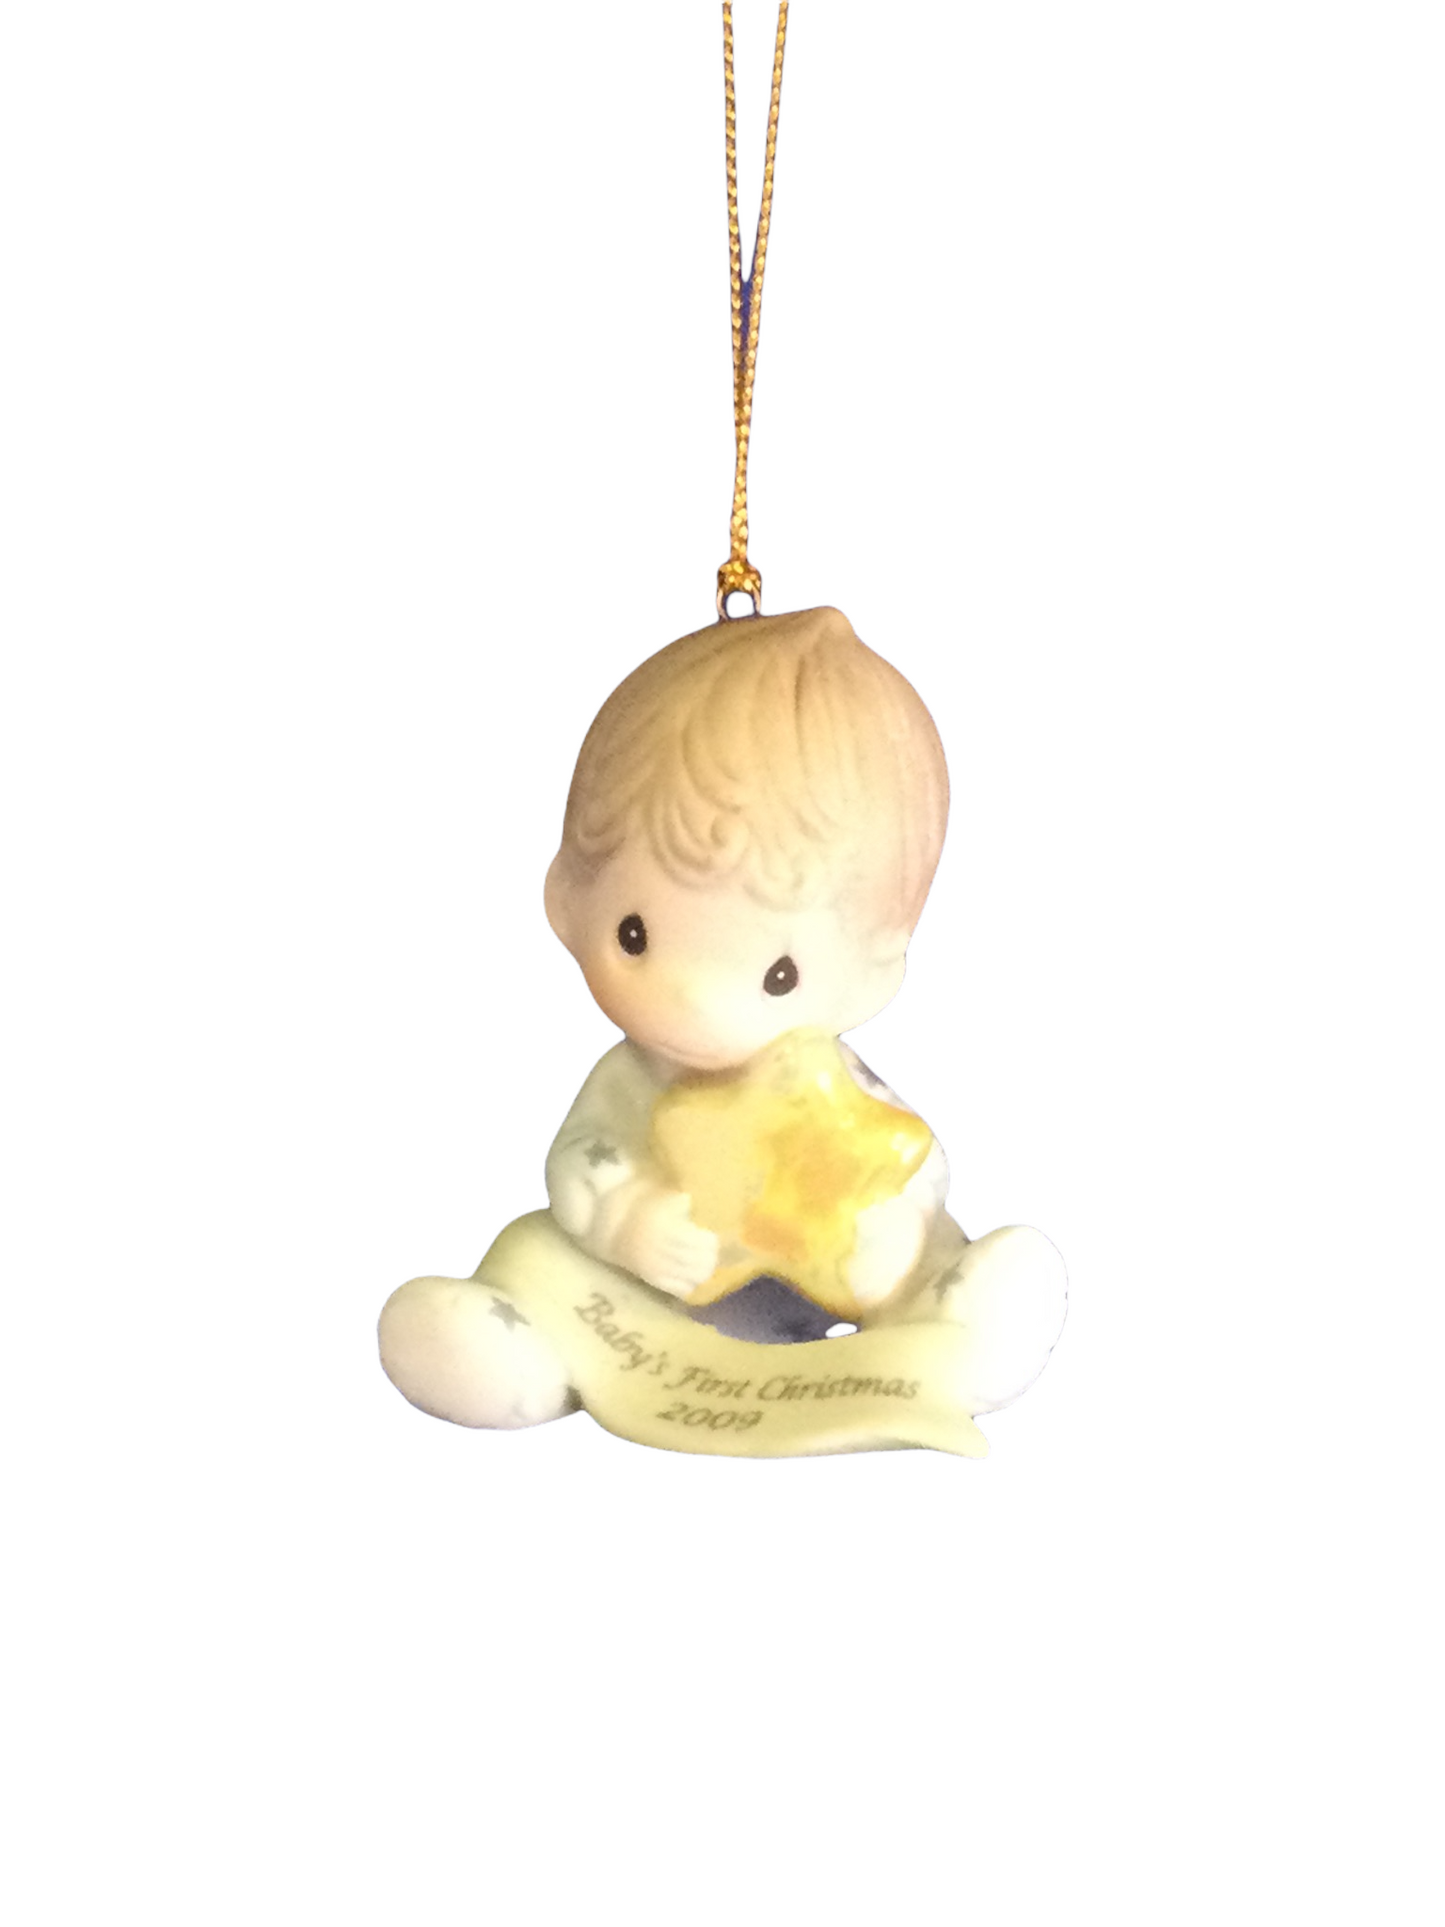 Baby's First Christmas 2009 (Boy) - Precious Moment Ornament